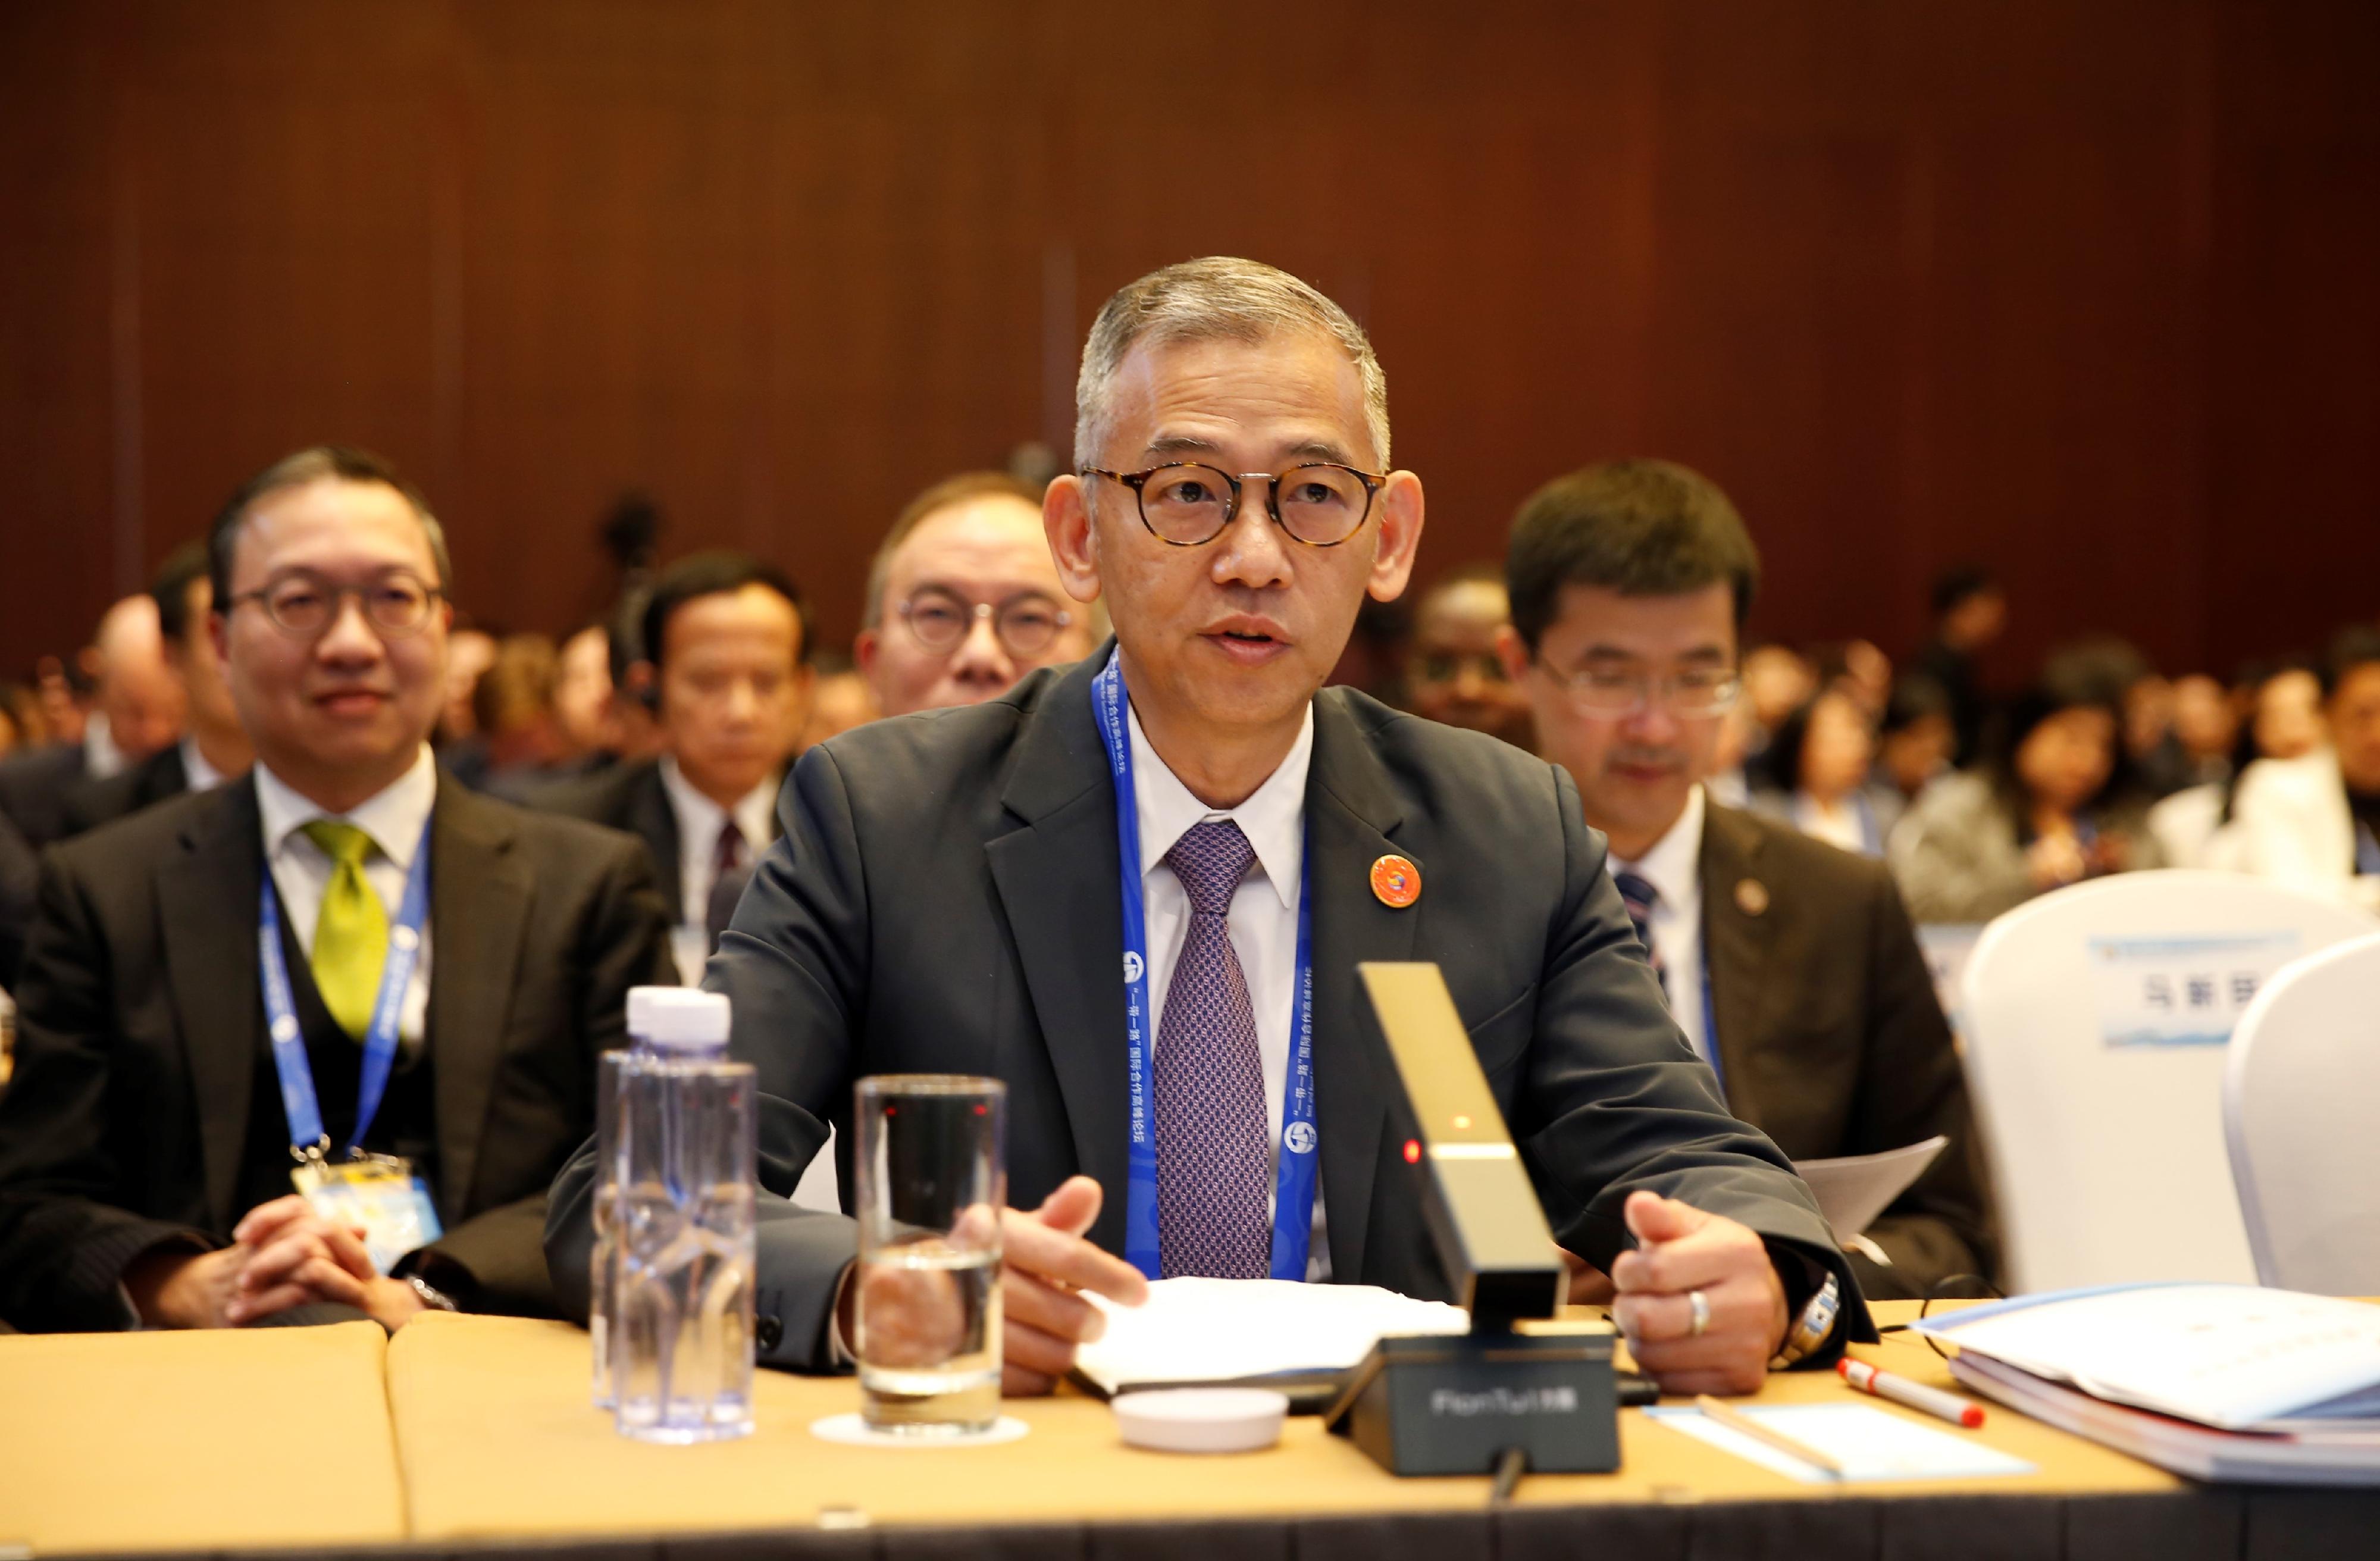 ICAC Commissioner Woo Ying-ming today (October 18) says at Thematic Forum on Clean Silk Road that ICAC has been actively partnering with Belt and Road countries to co-build the "Clean Silk Road".